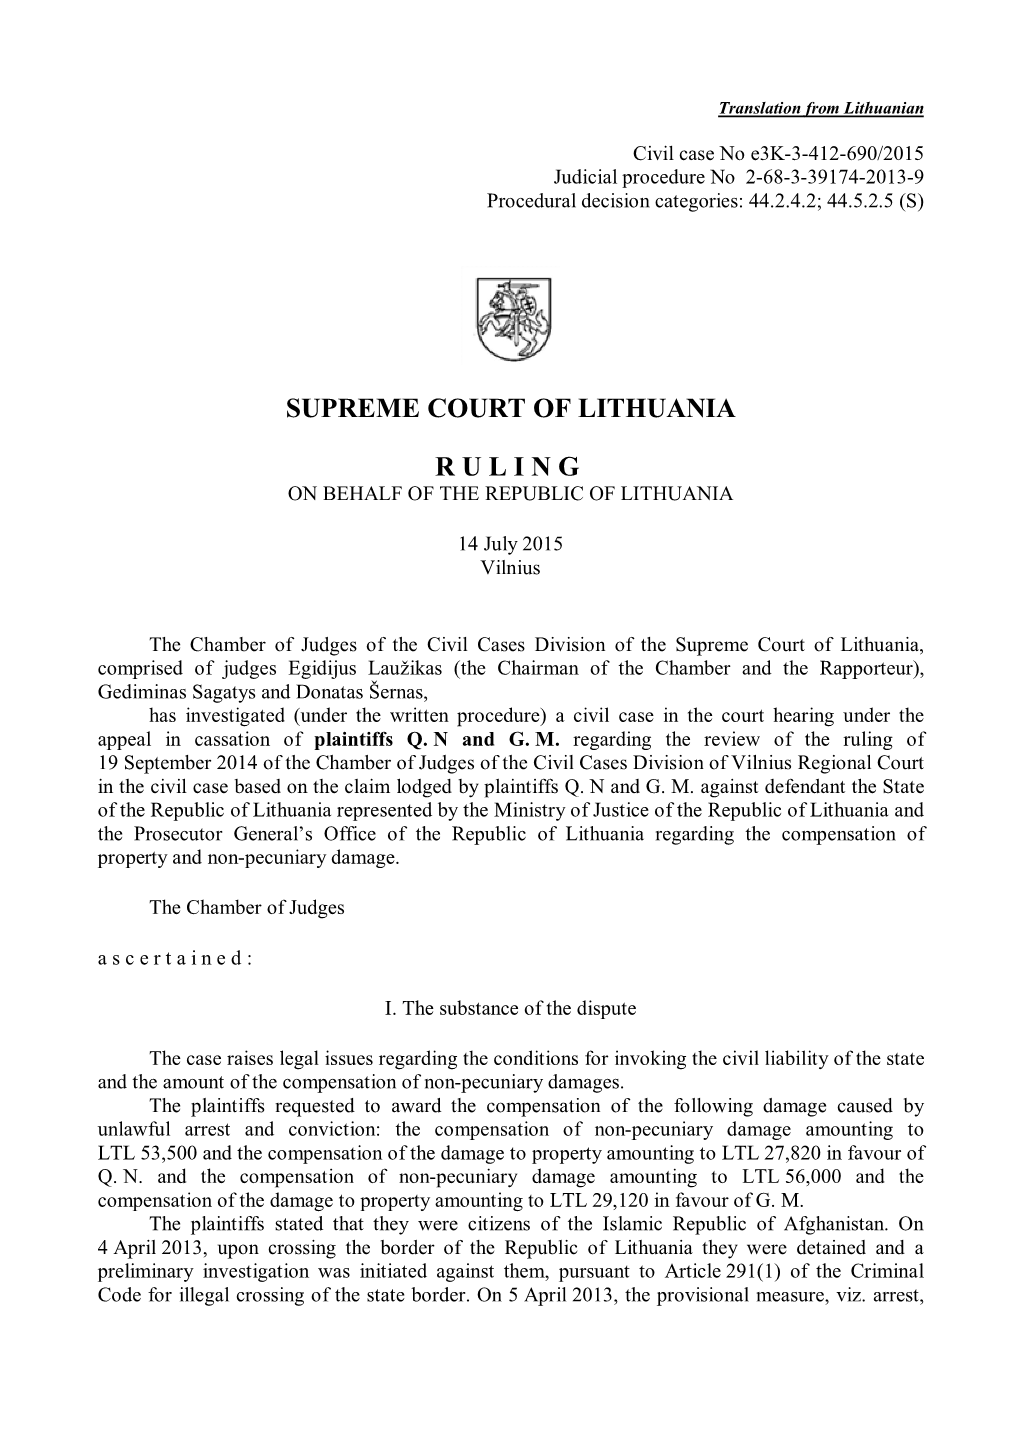 Supreme Court of Lithuania Ruling